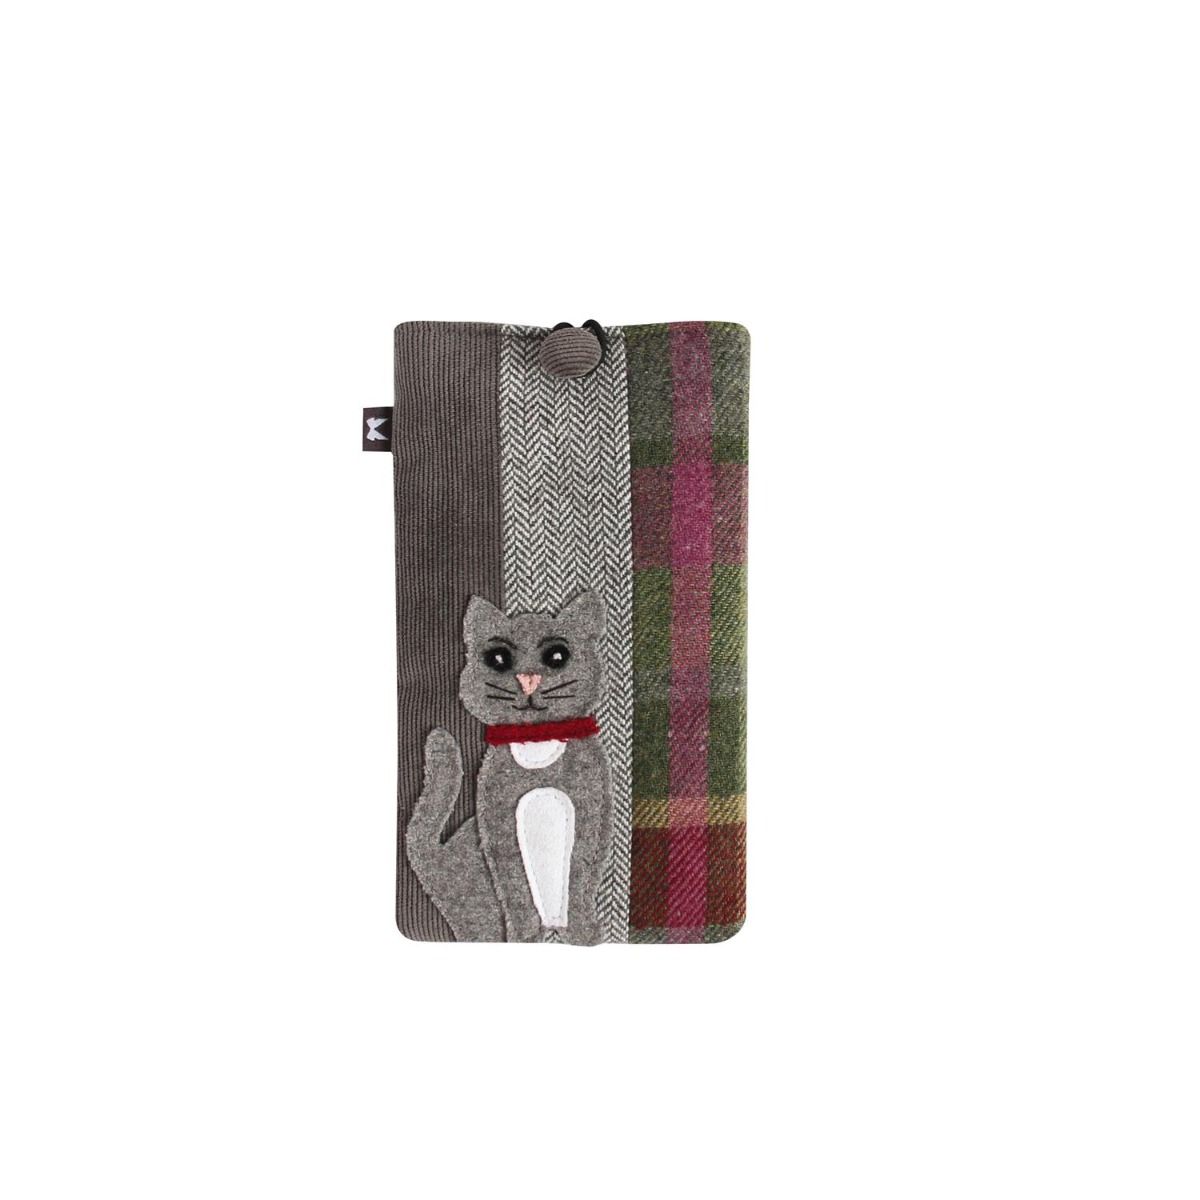 Tweed Applique Eyeglass Case by Earth Squared